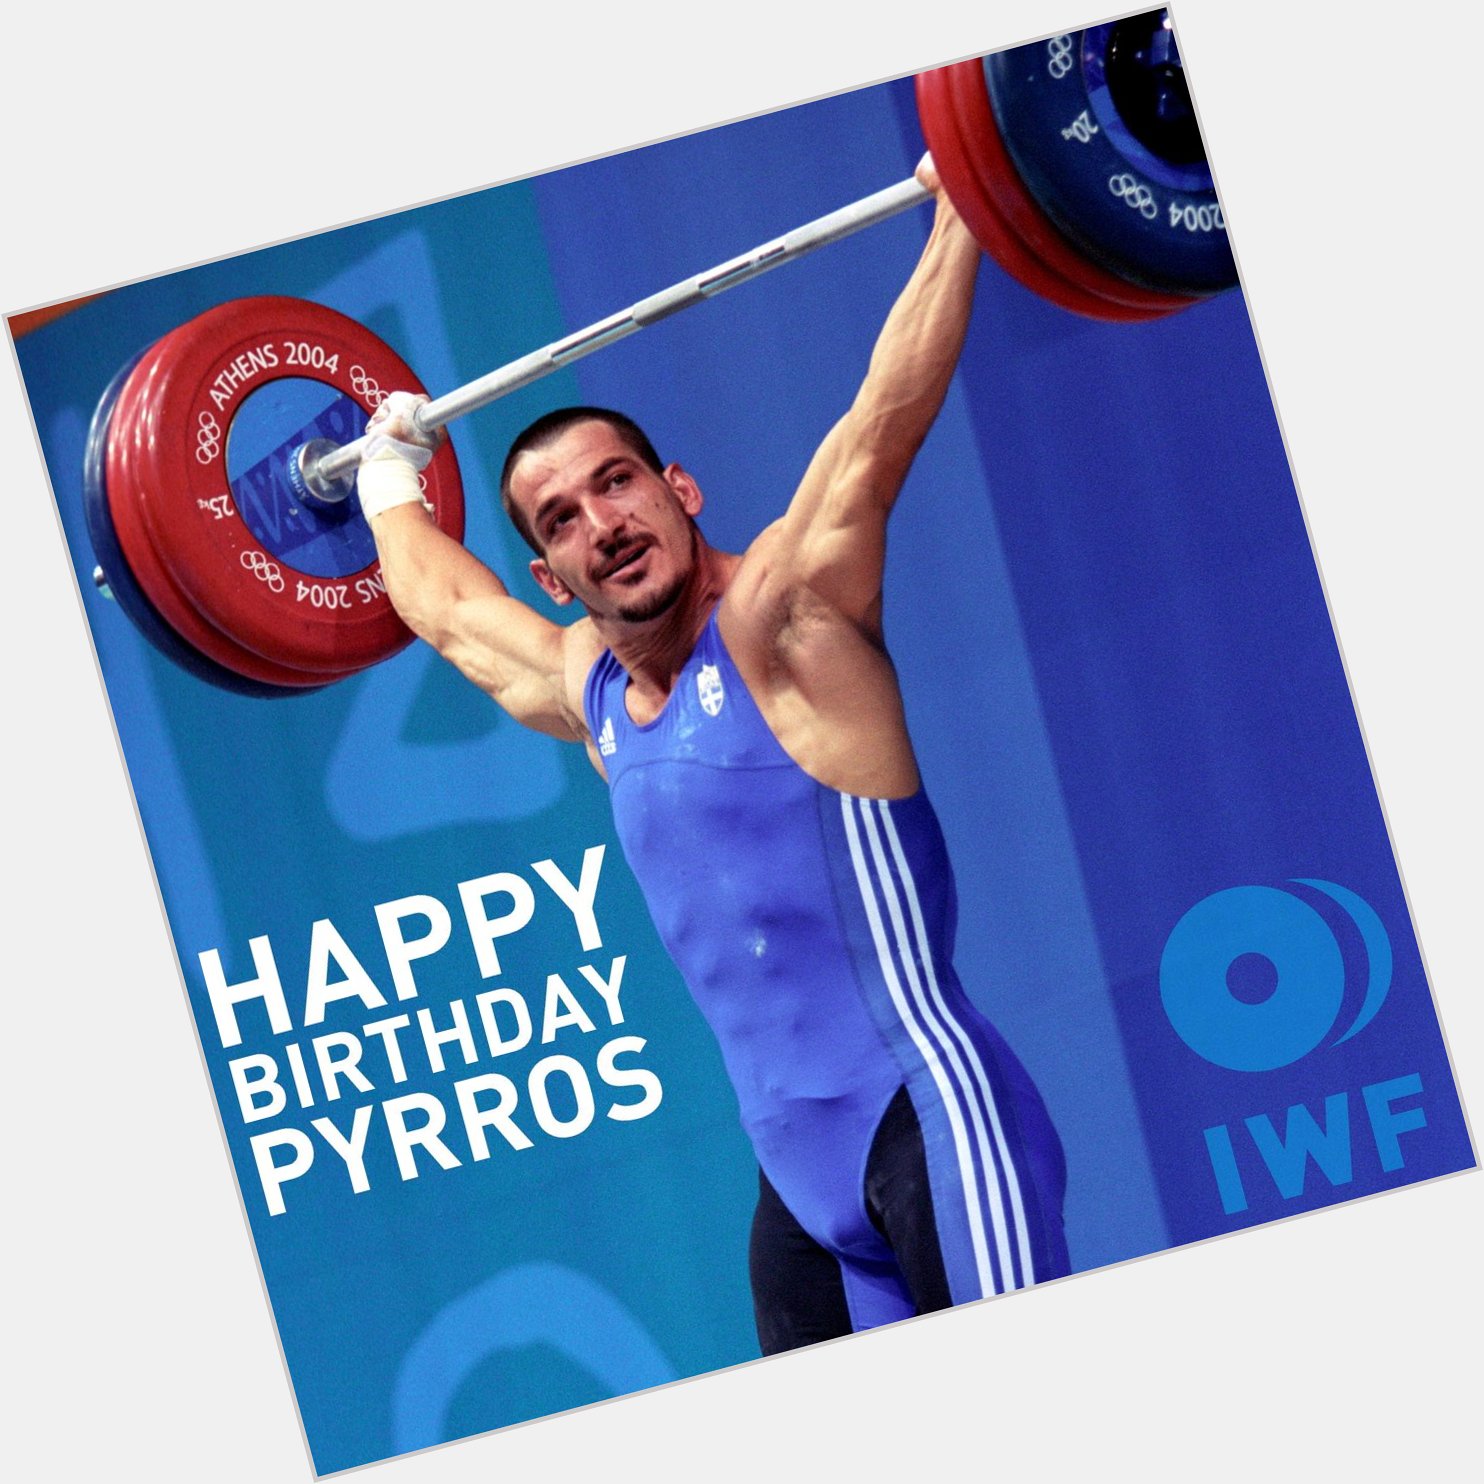 HAPPY BIRTHDAY to - the most decorated weightlifter! Enjoy watching  